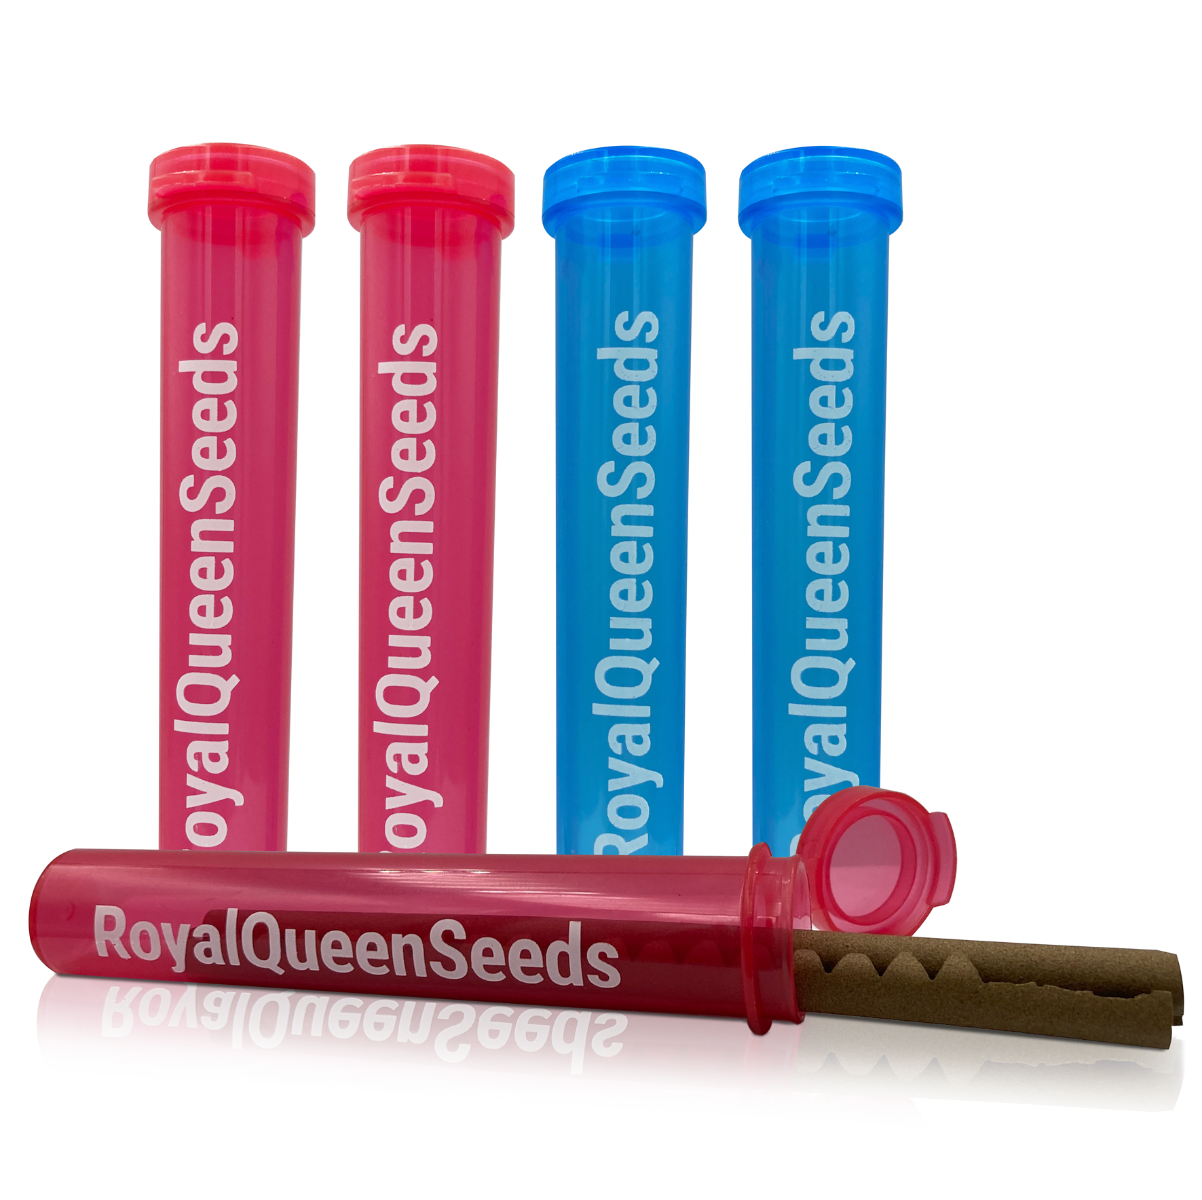 Royal Queen Seeds Cone Tube